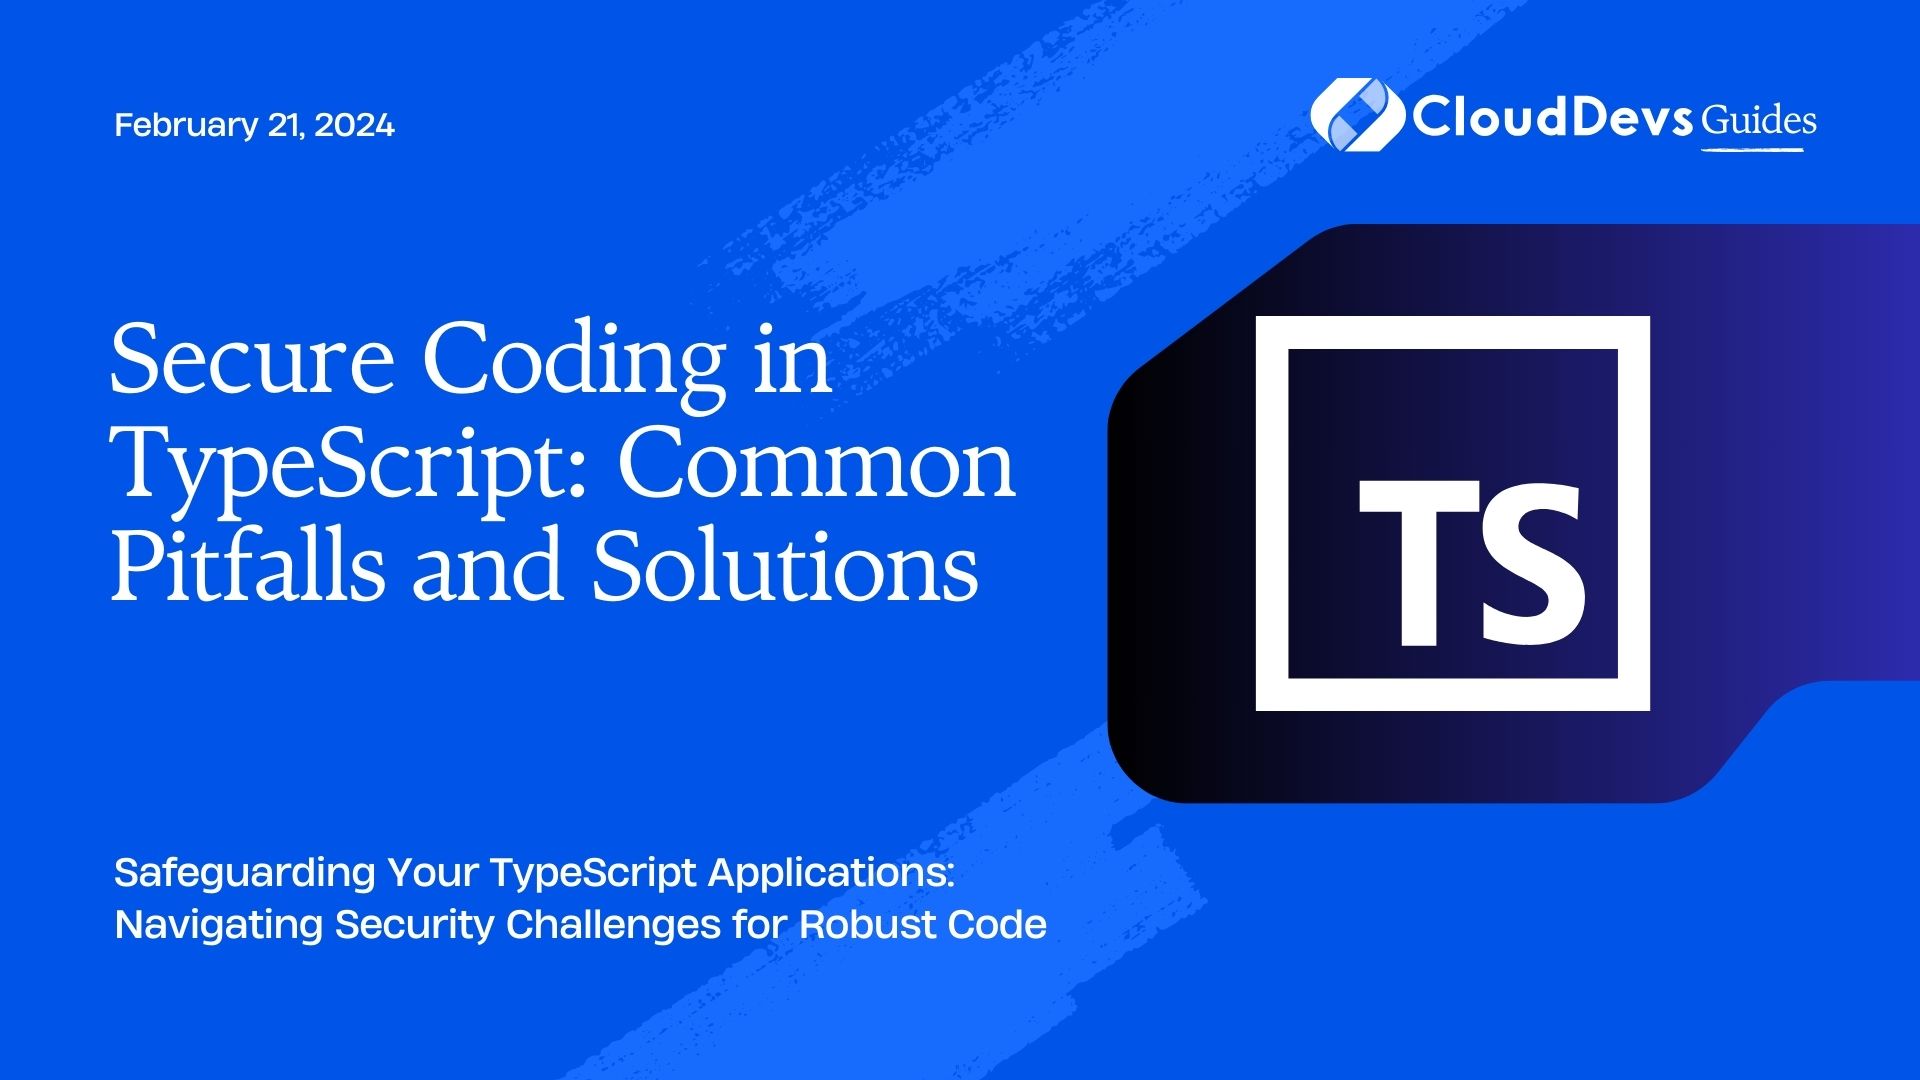 Secure Coding in TypeScript: Common Pitfalls and Solutions